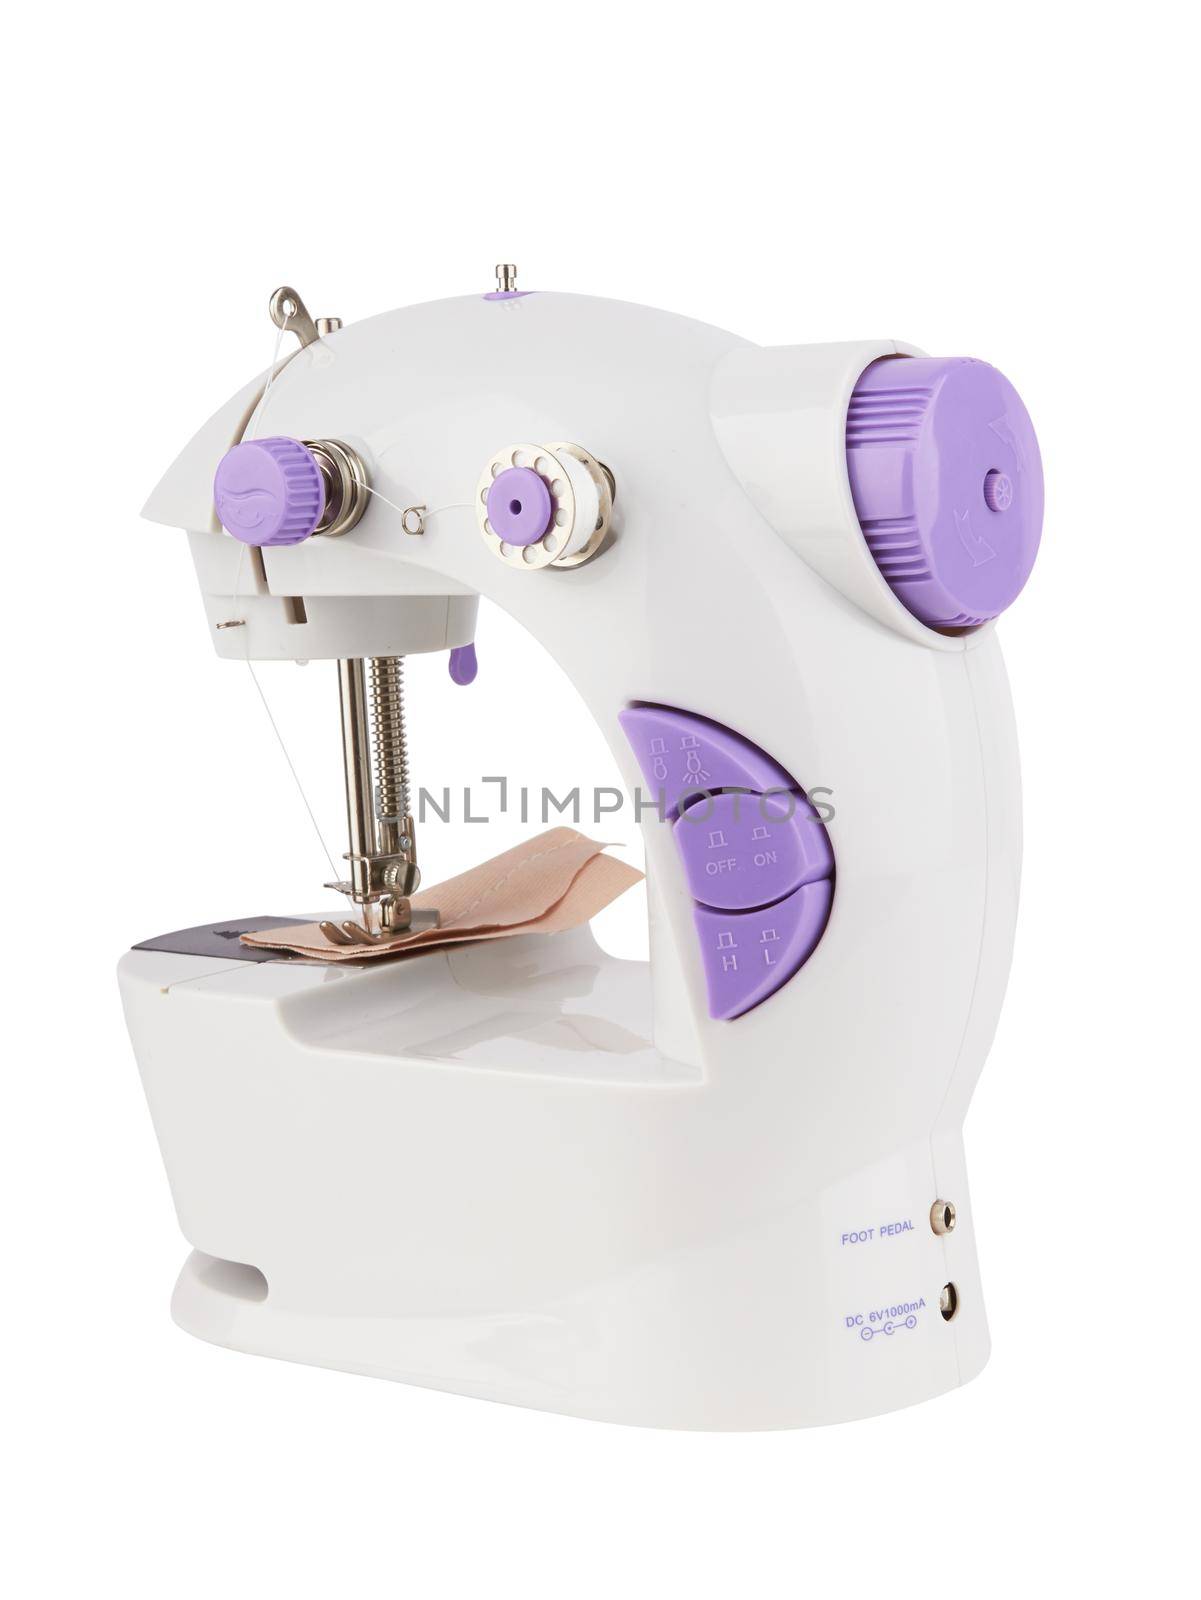 Sewing machine isolated on a white background